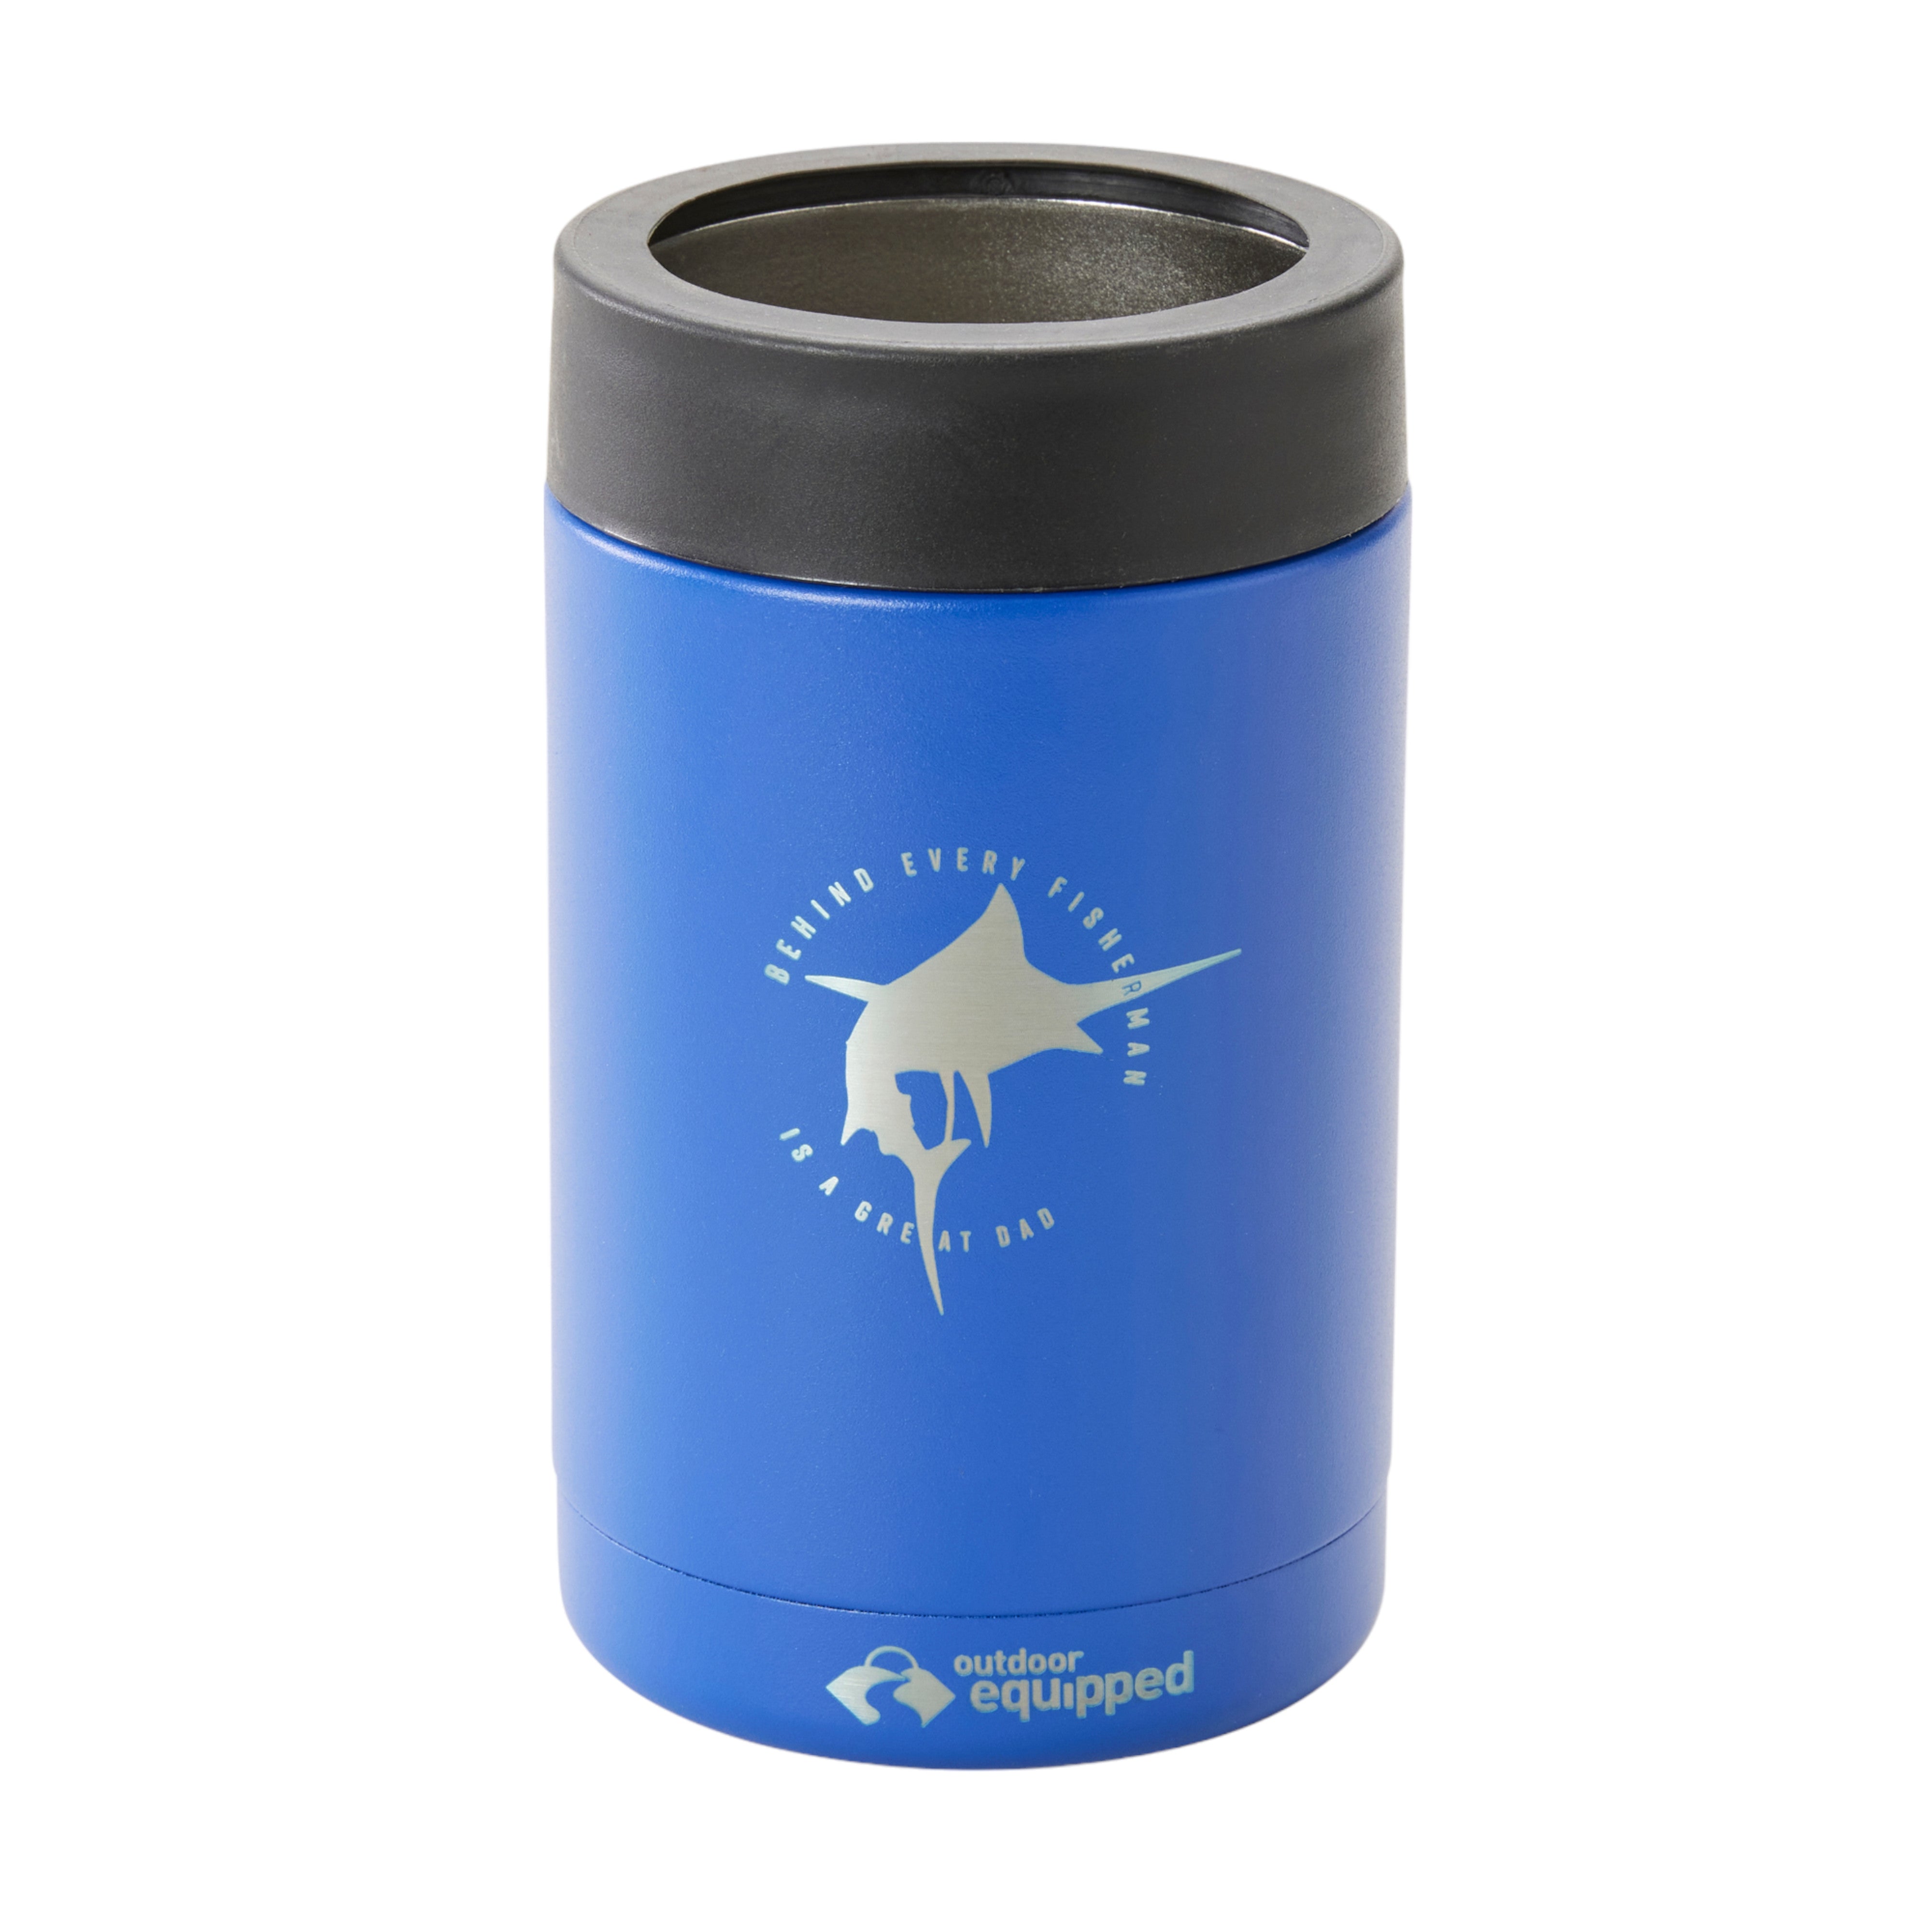 Outdoor Equipped Behind Fisherman Cooler Blue